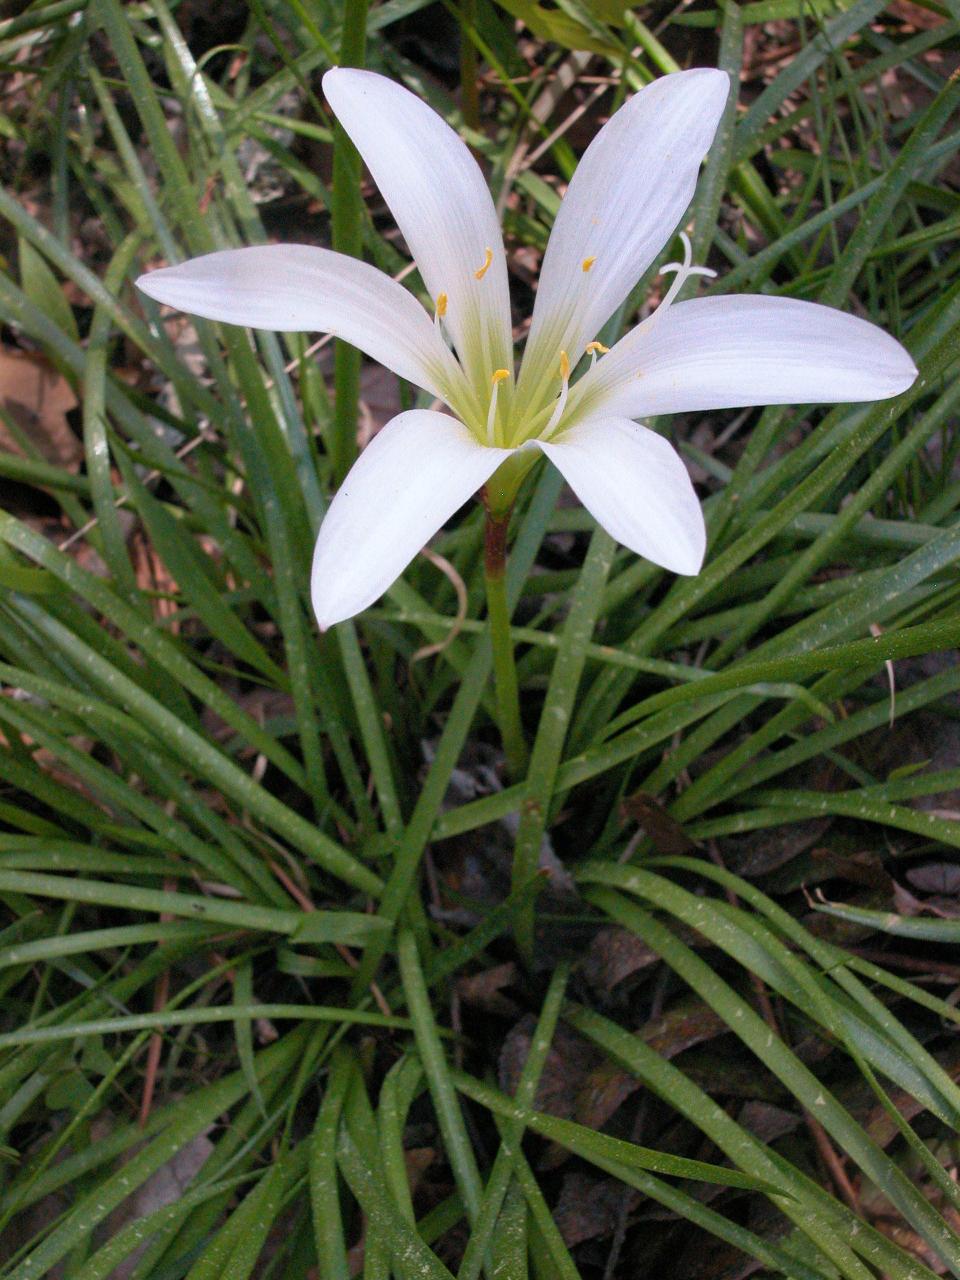 The rain lily  is a native Southeastern member of the regular "old" amaryllis family.